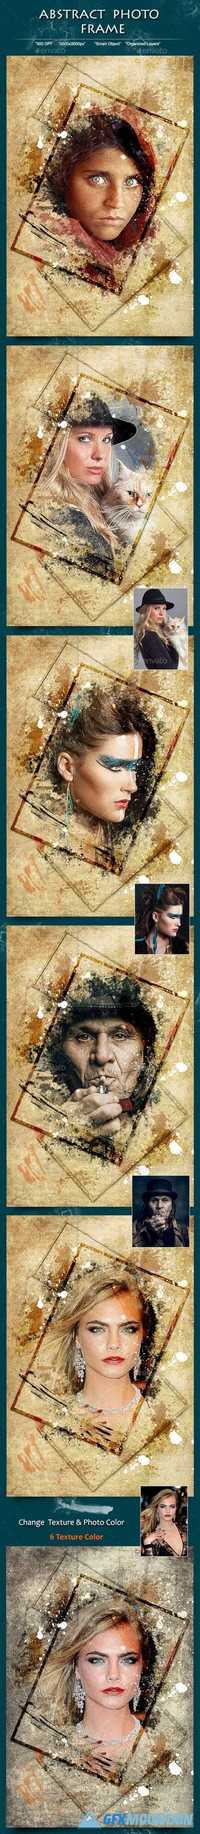 GraphicRiver - Abstract Photo Frame 19354213